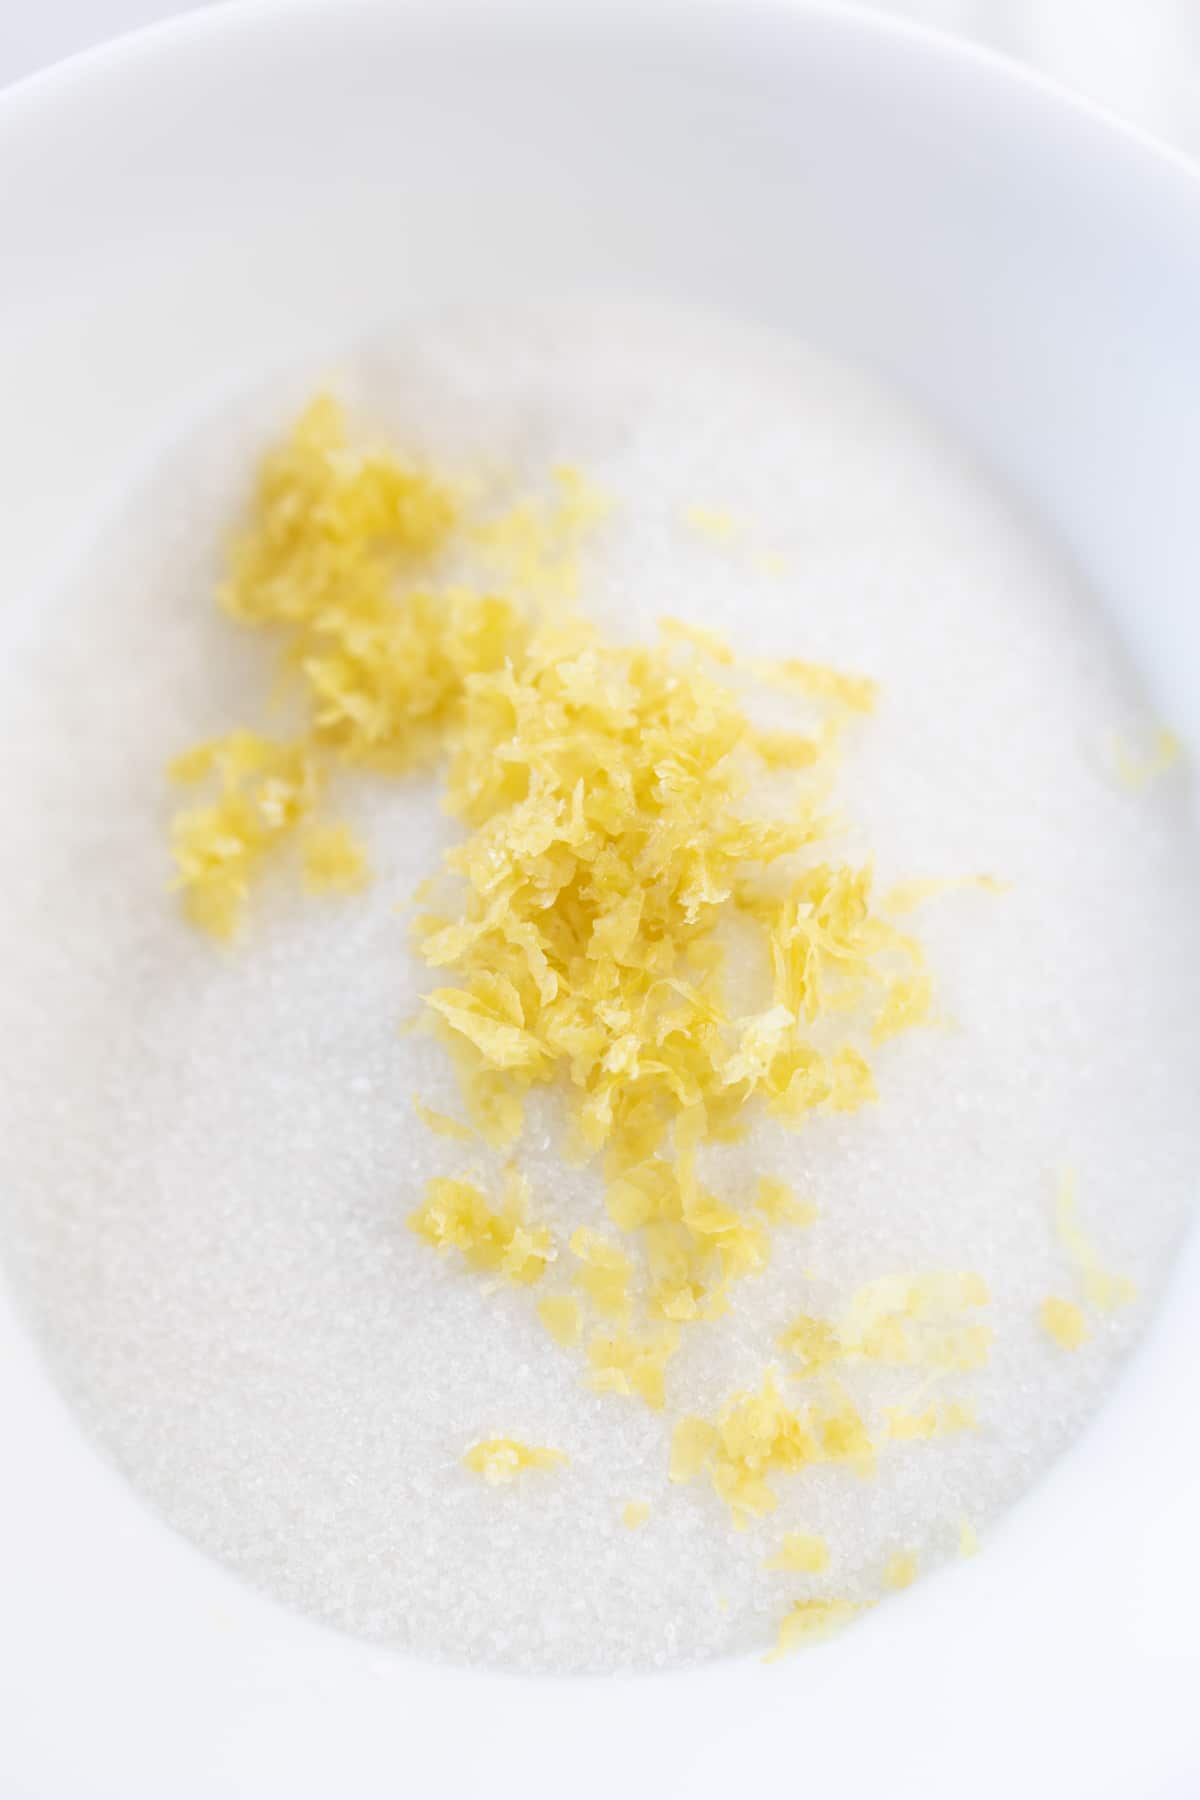 Top view of lemon zest and white sugar in a white bowl.